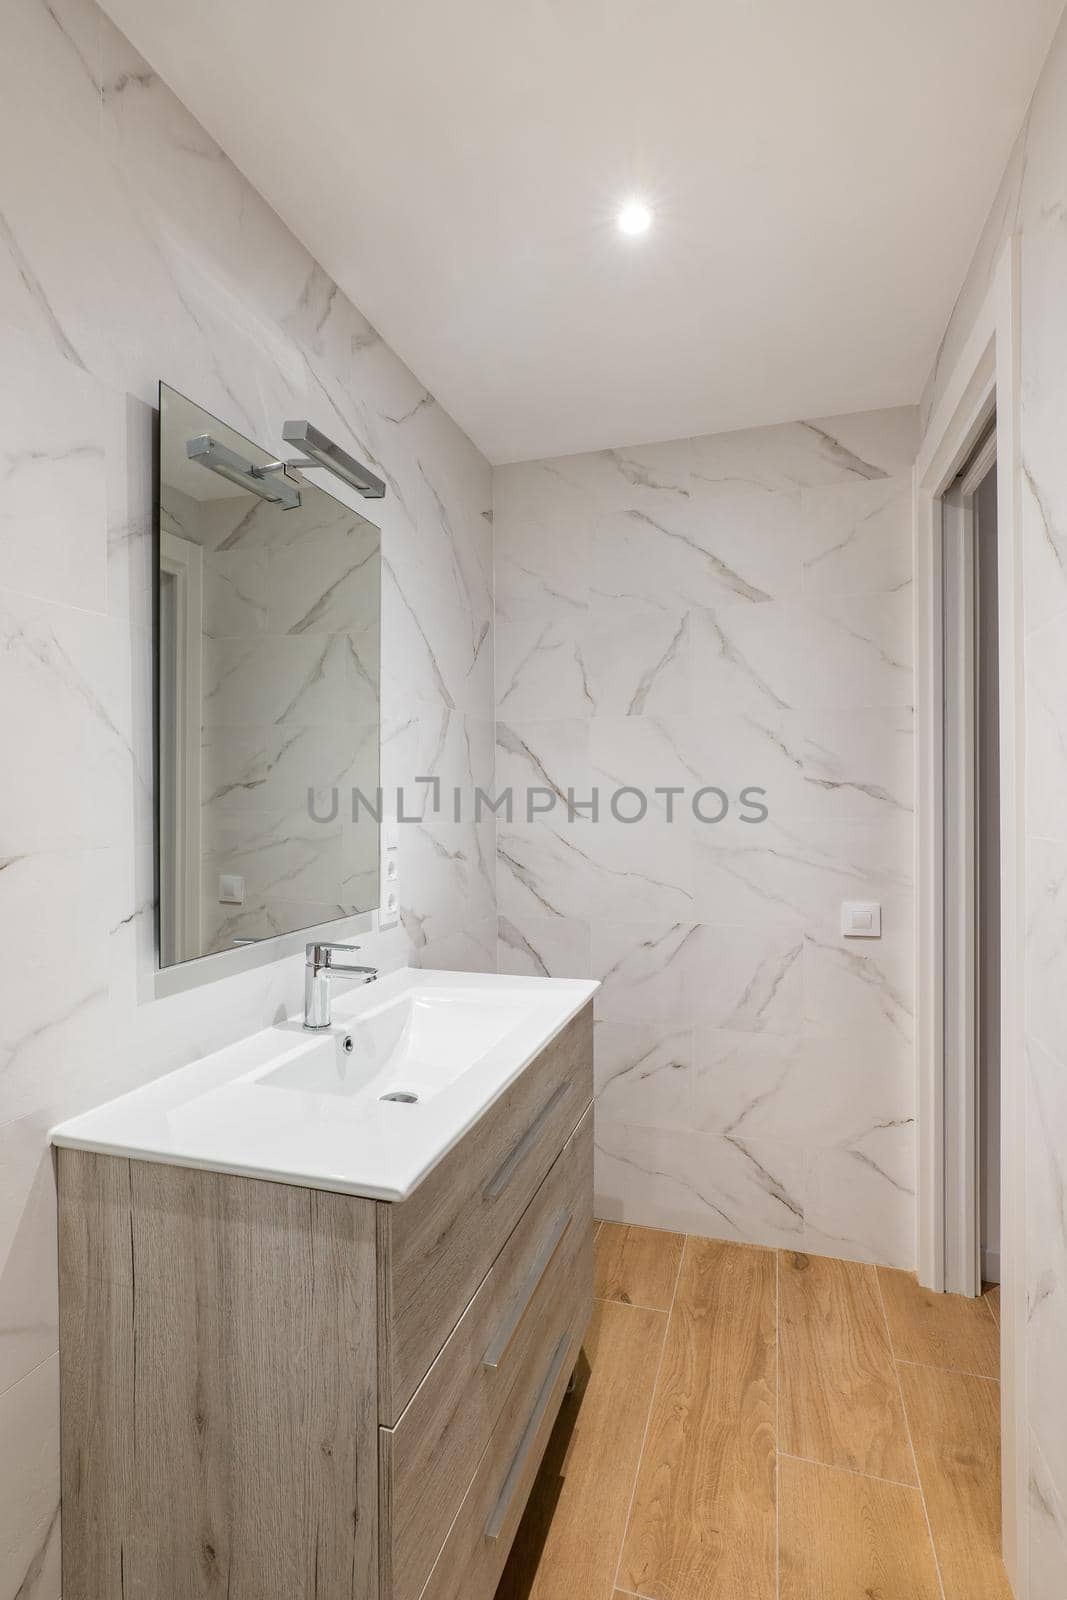 Bathroom with white tiles, mirror, ceramic sink under a wardrobe in a modern house or office